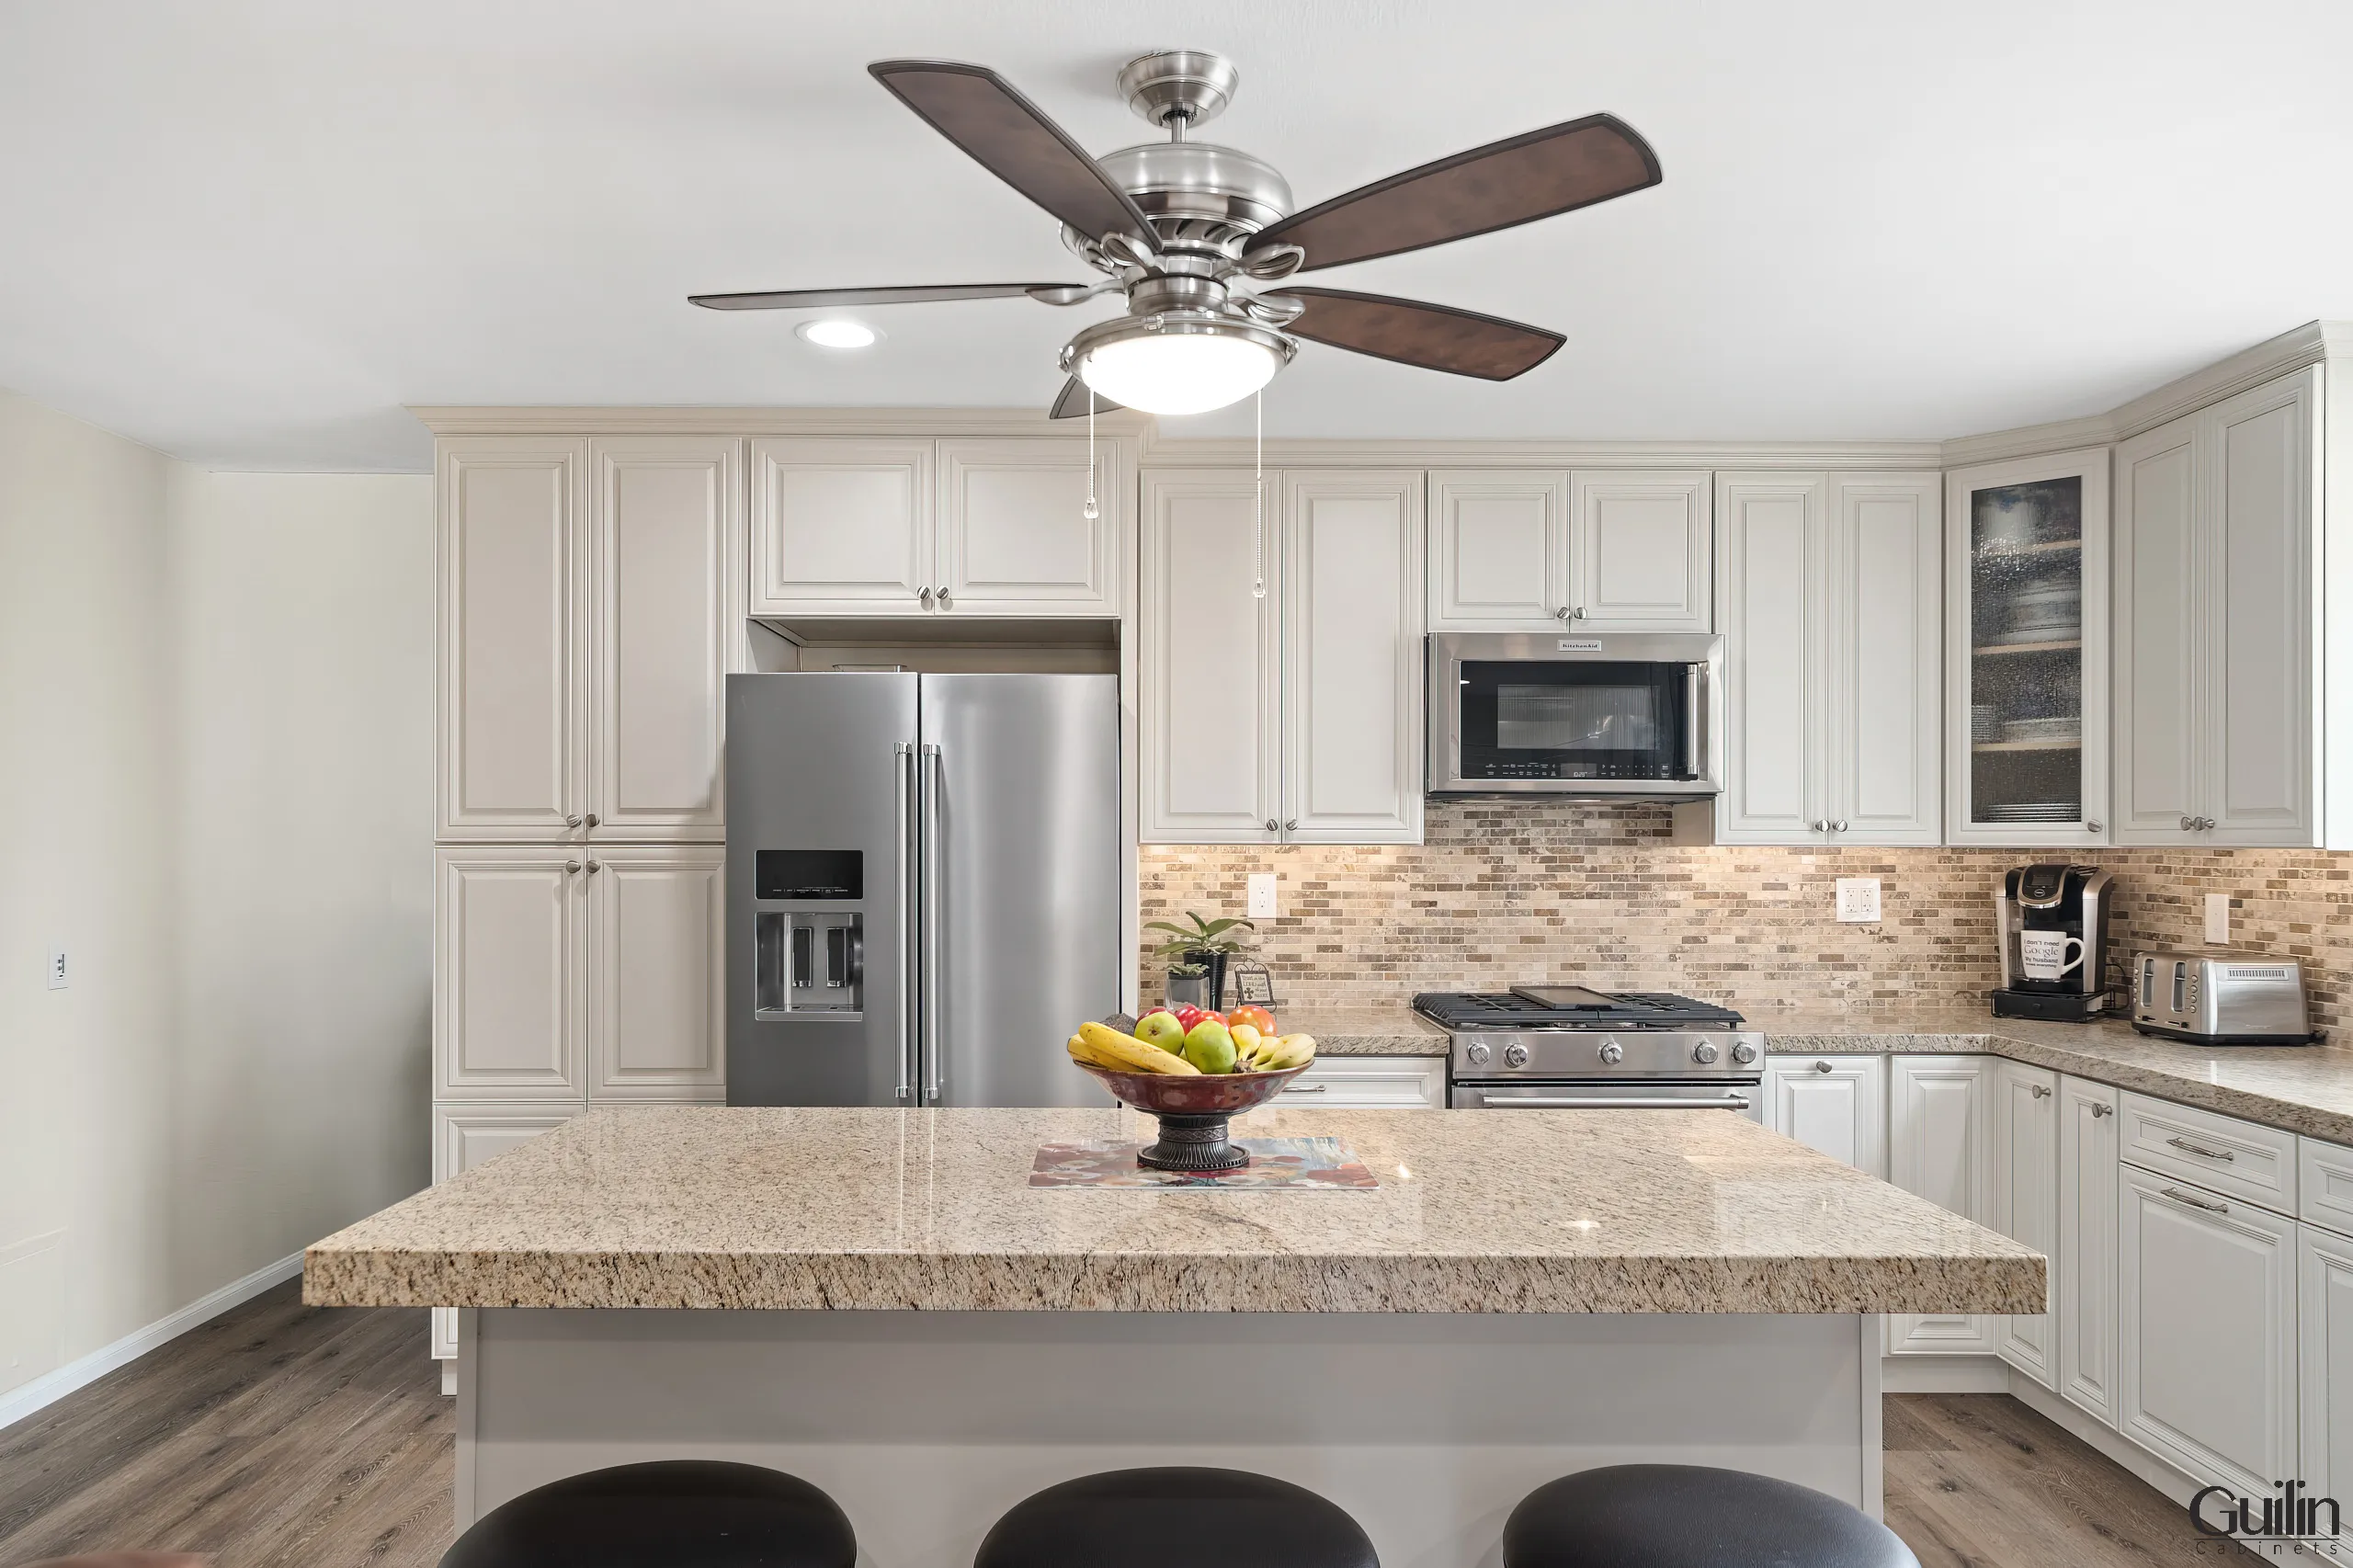 Granite countertops perfect choice for any kitchen design - Guilin Cabinets